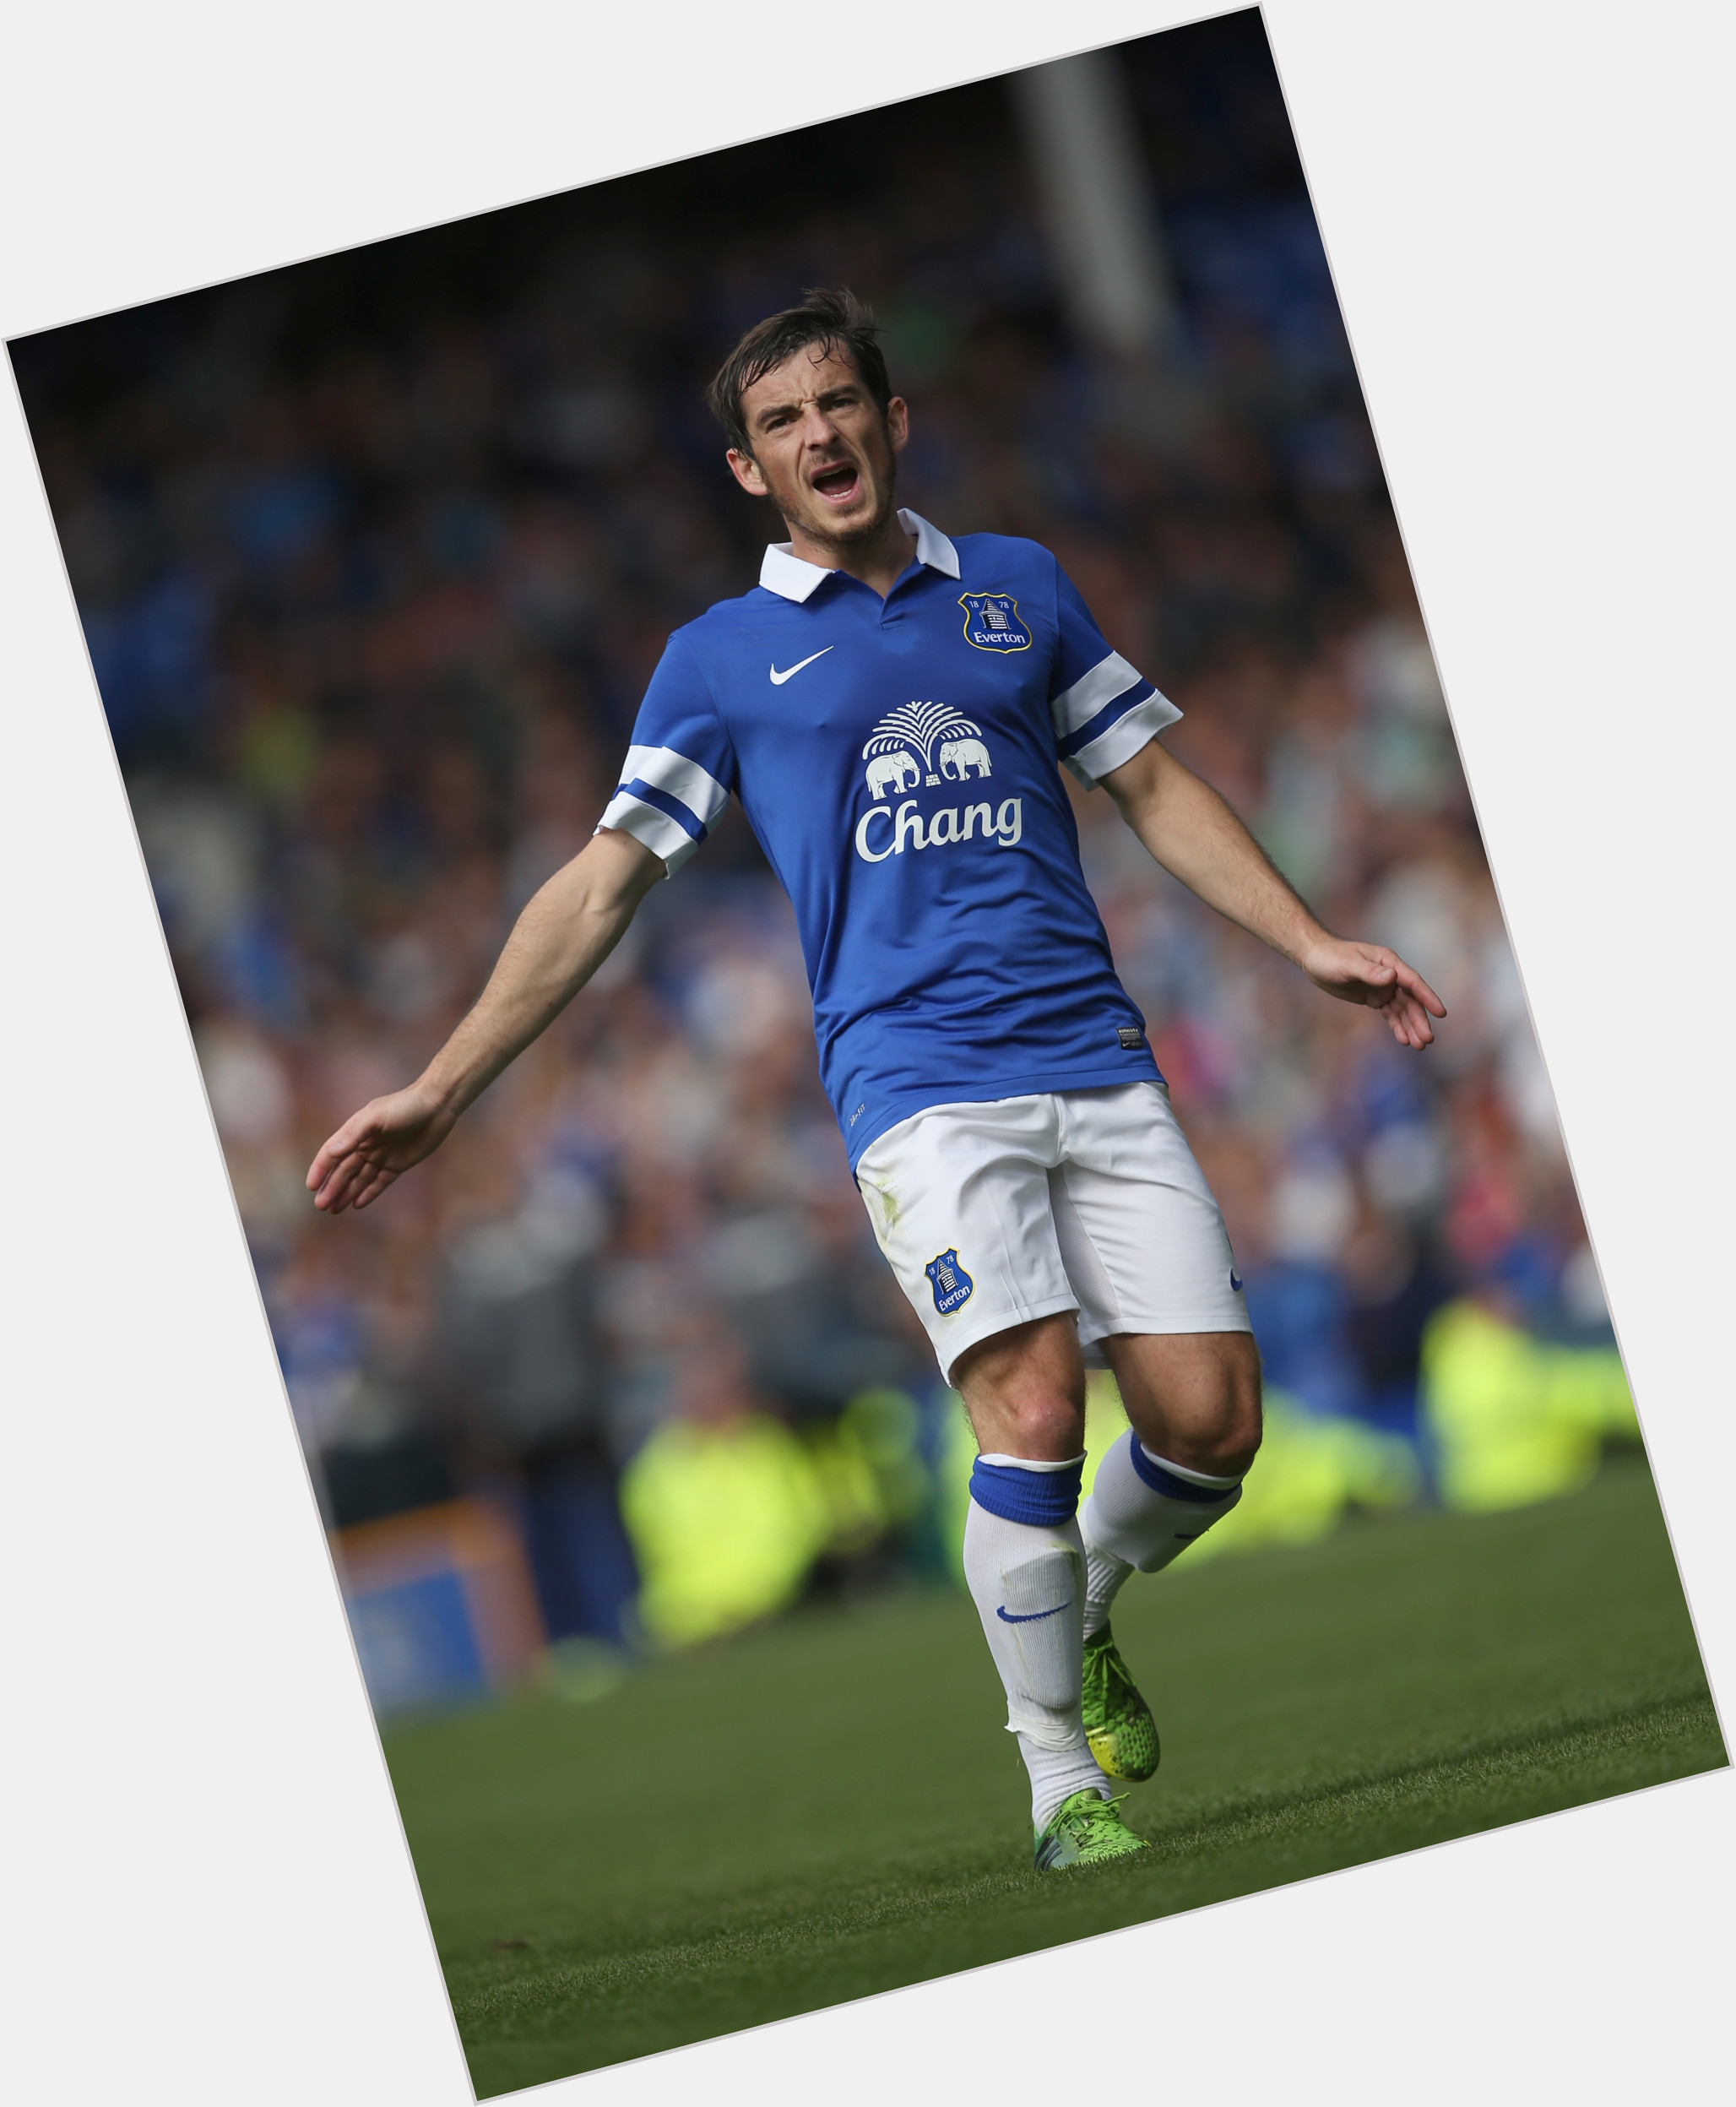 Http://fanpagepress.net/m/L/Leighton Baines Dating 2